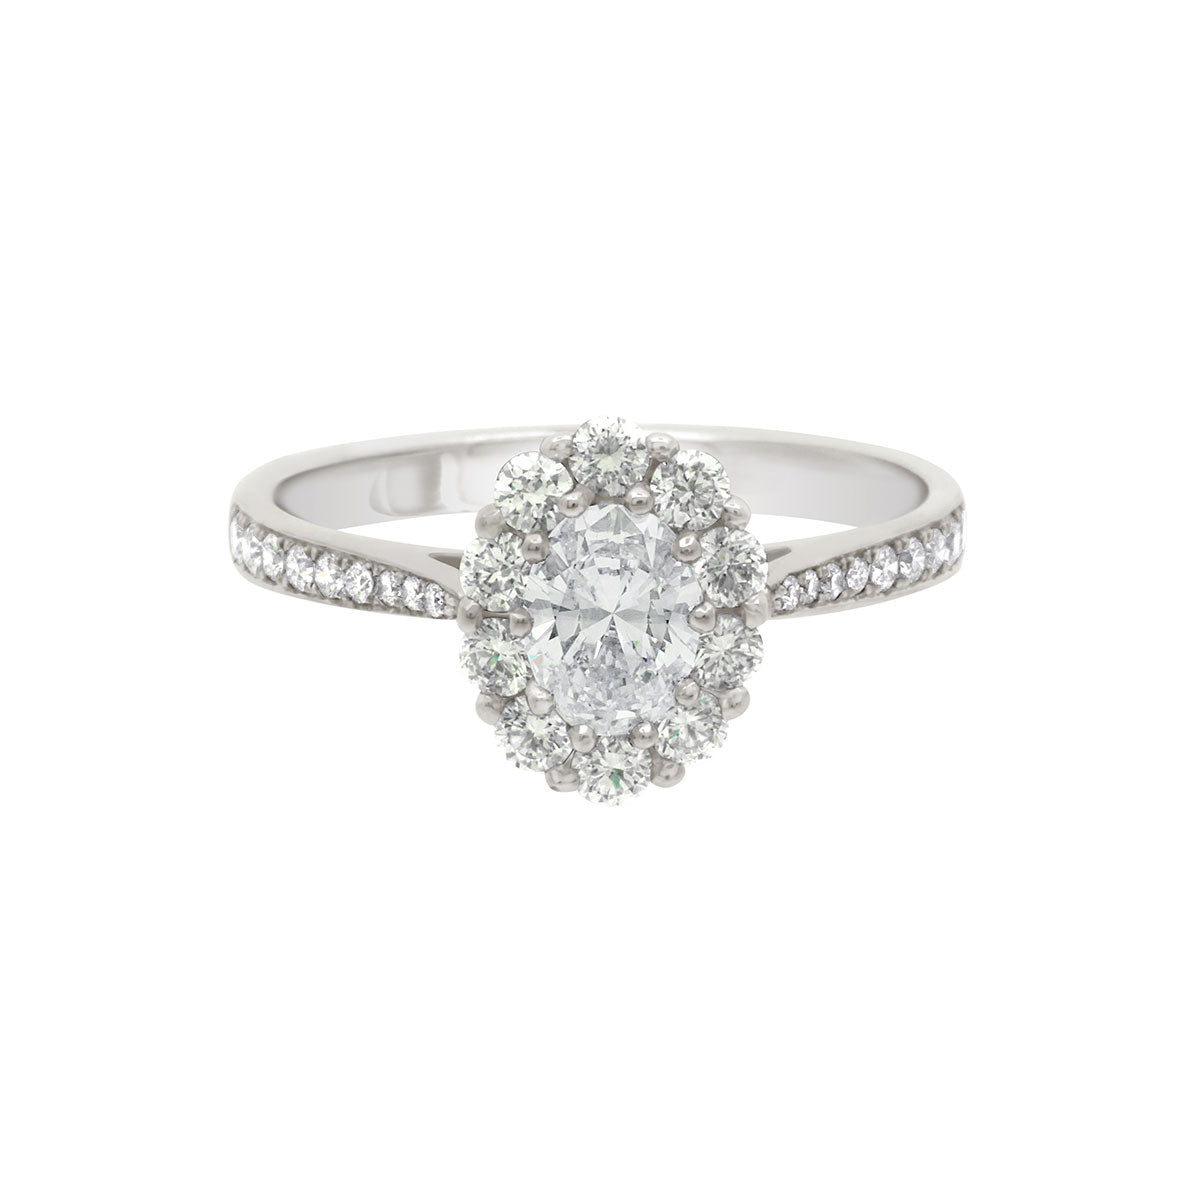 Cluster Engagement Ring with diamond shoulders in white gold